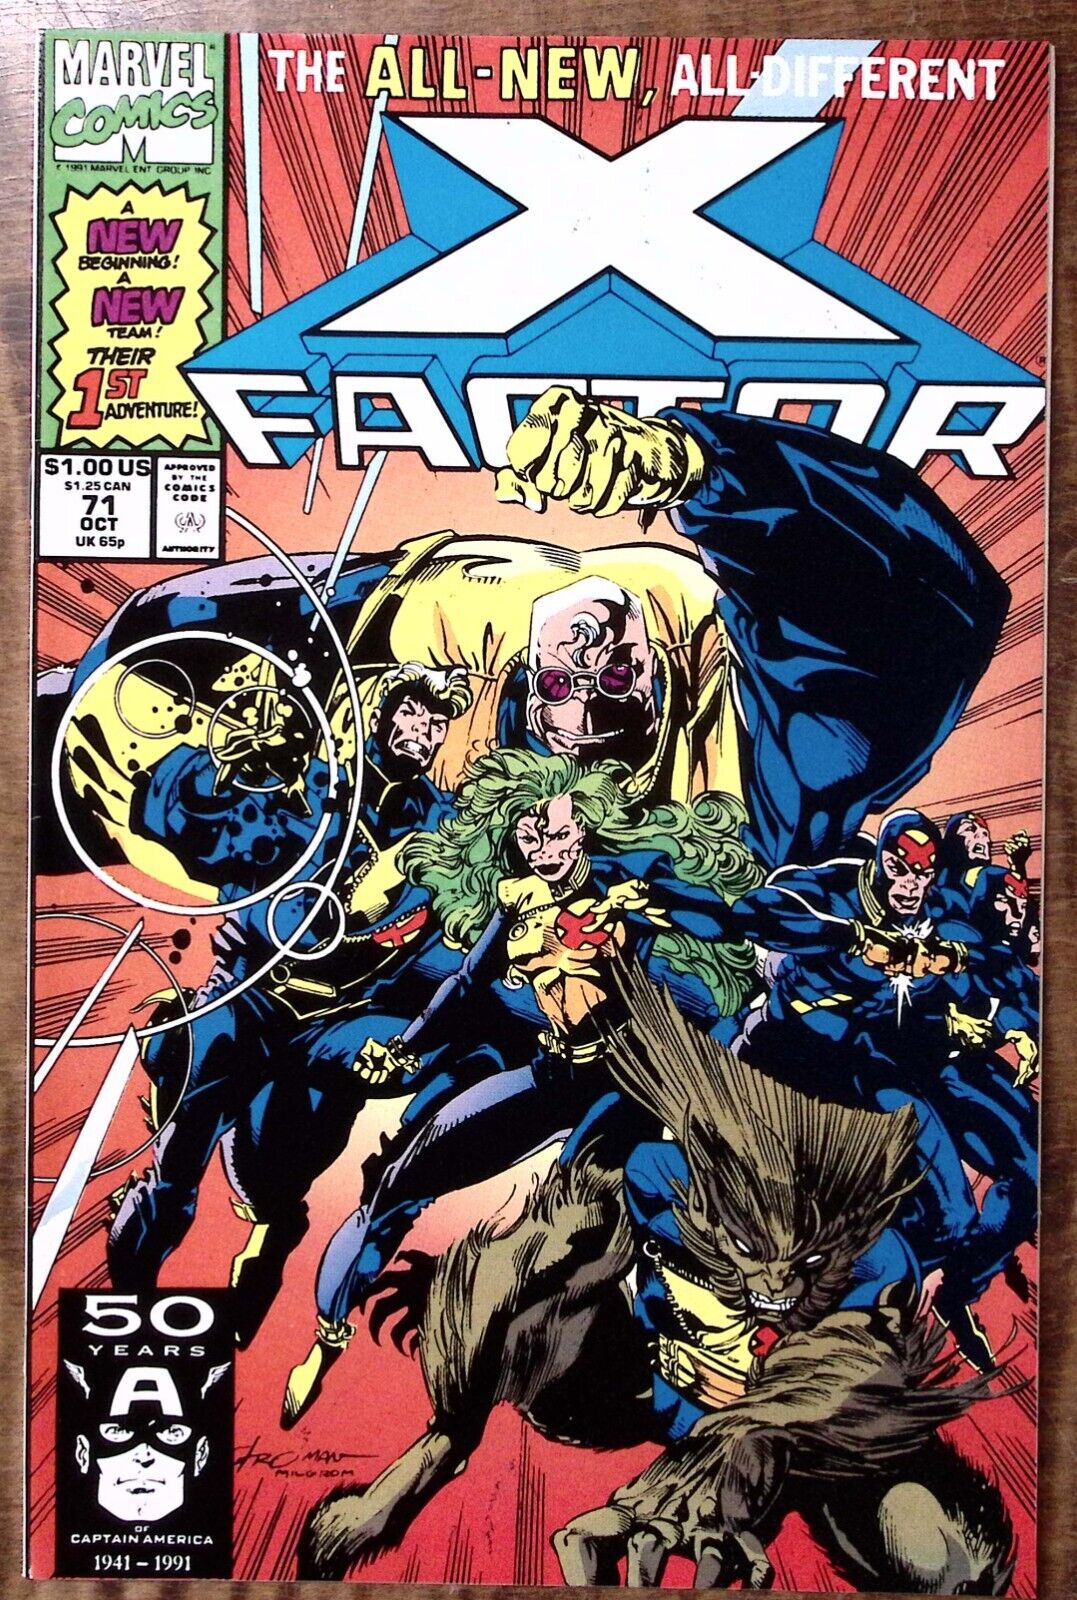 1991 X FACTOR #71 OCT MARVEL COMICS ALL-NEW 1st ISSUE CUTTING MUSTARD  EXC Z4910